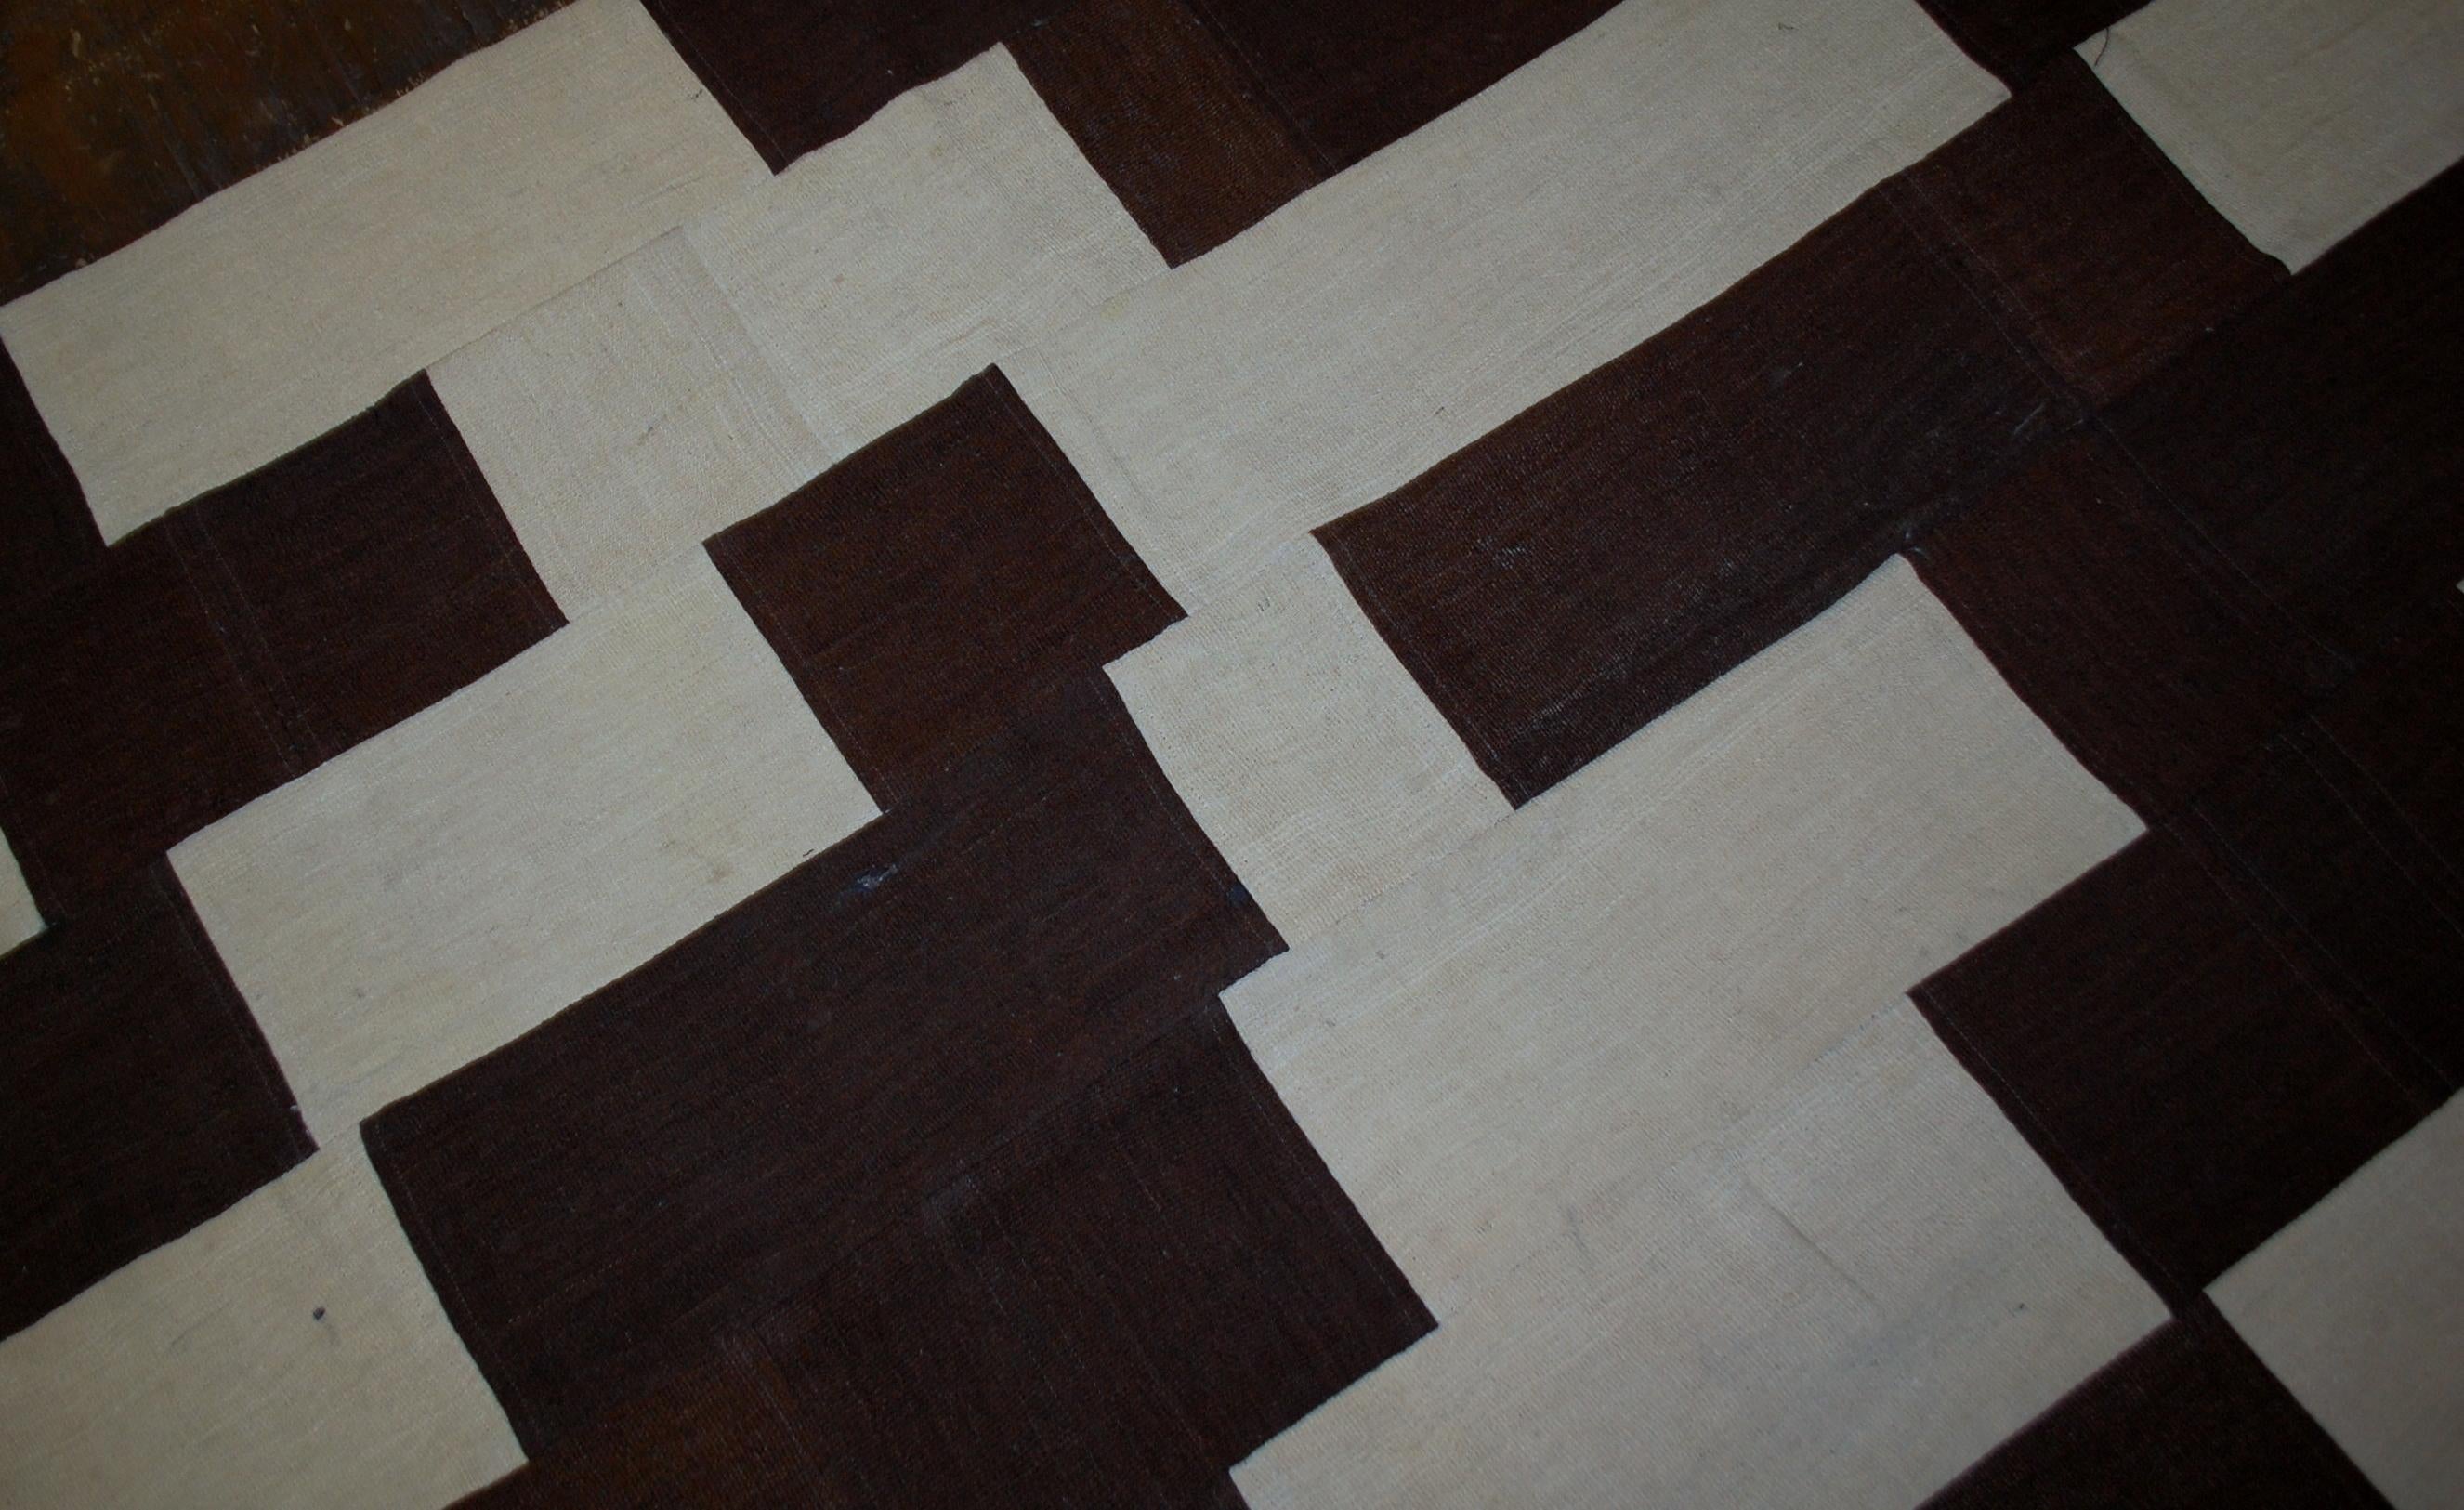 Handmade vintage Turkish Kilim patchwork in original condition. This Kilim made in white shade for the background and chocolate brown rectangles randomly placed on it. The Kilim is quite thick. Modern look will bring some style to the room. It is in